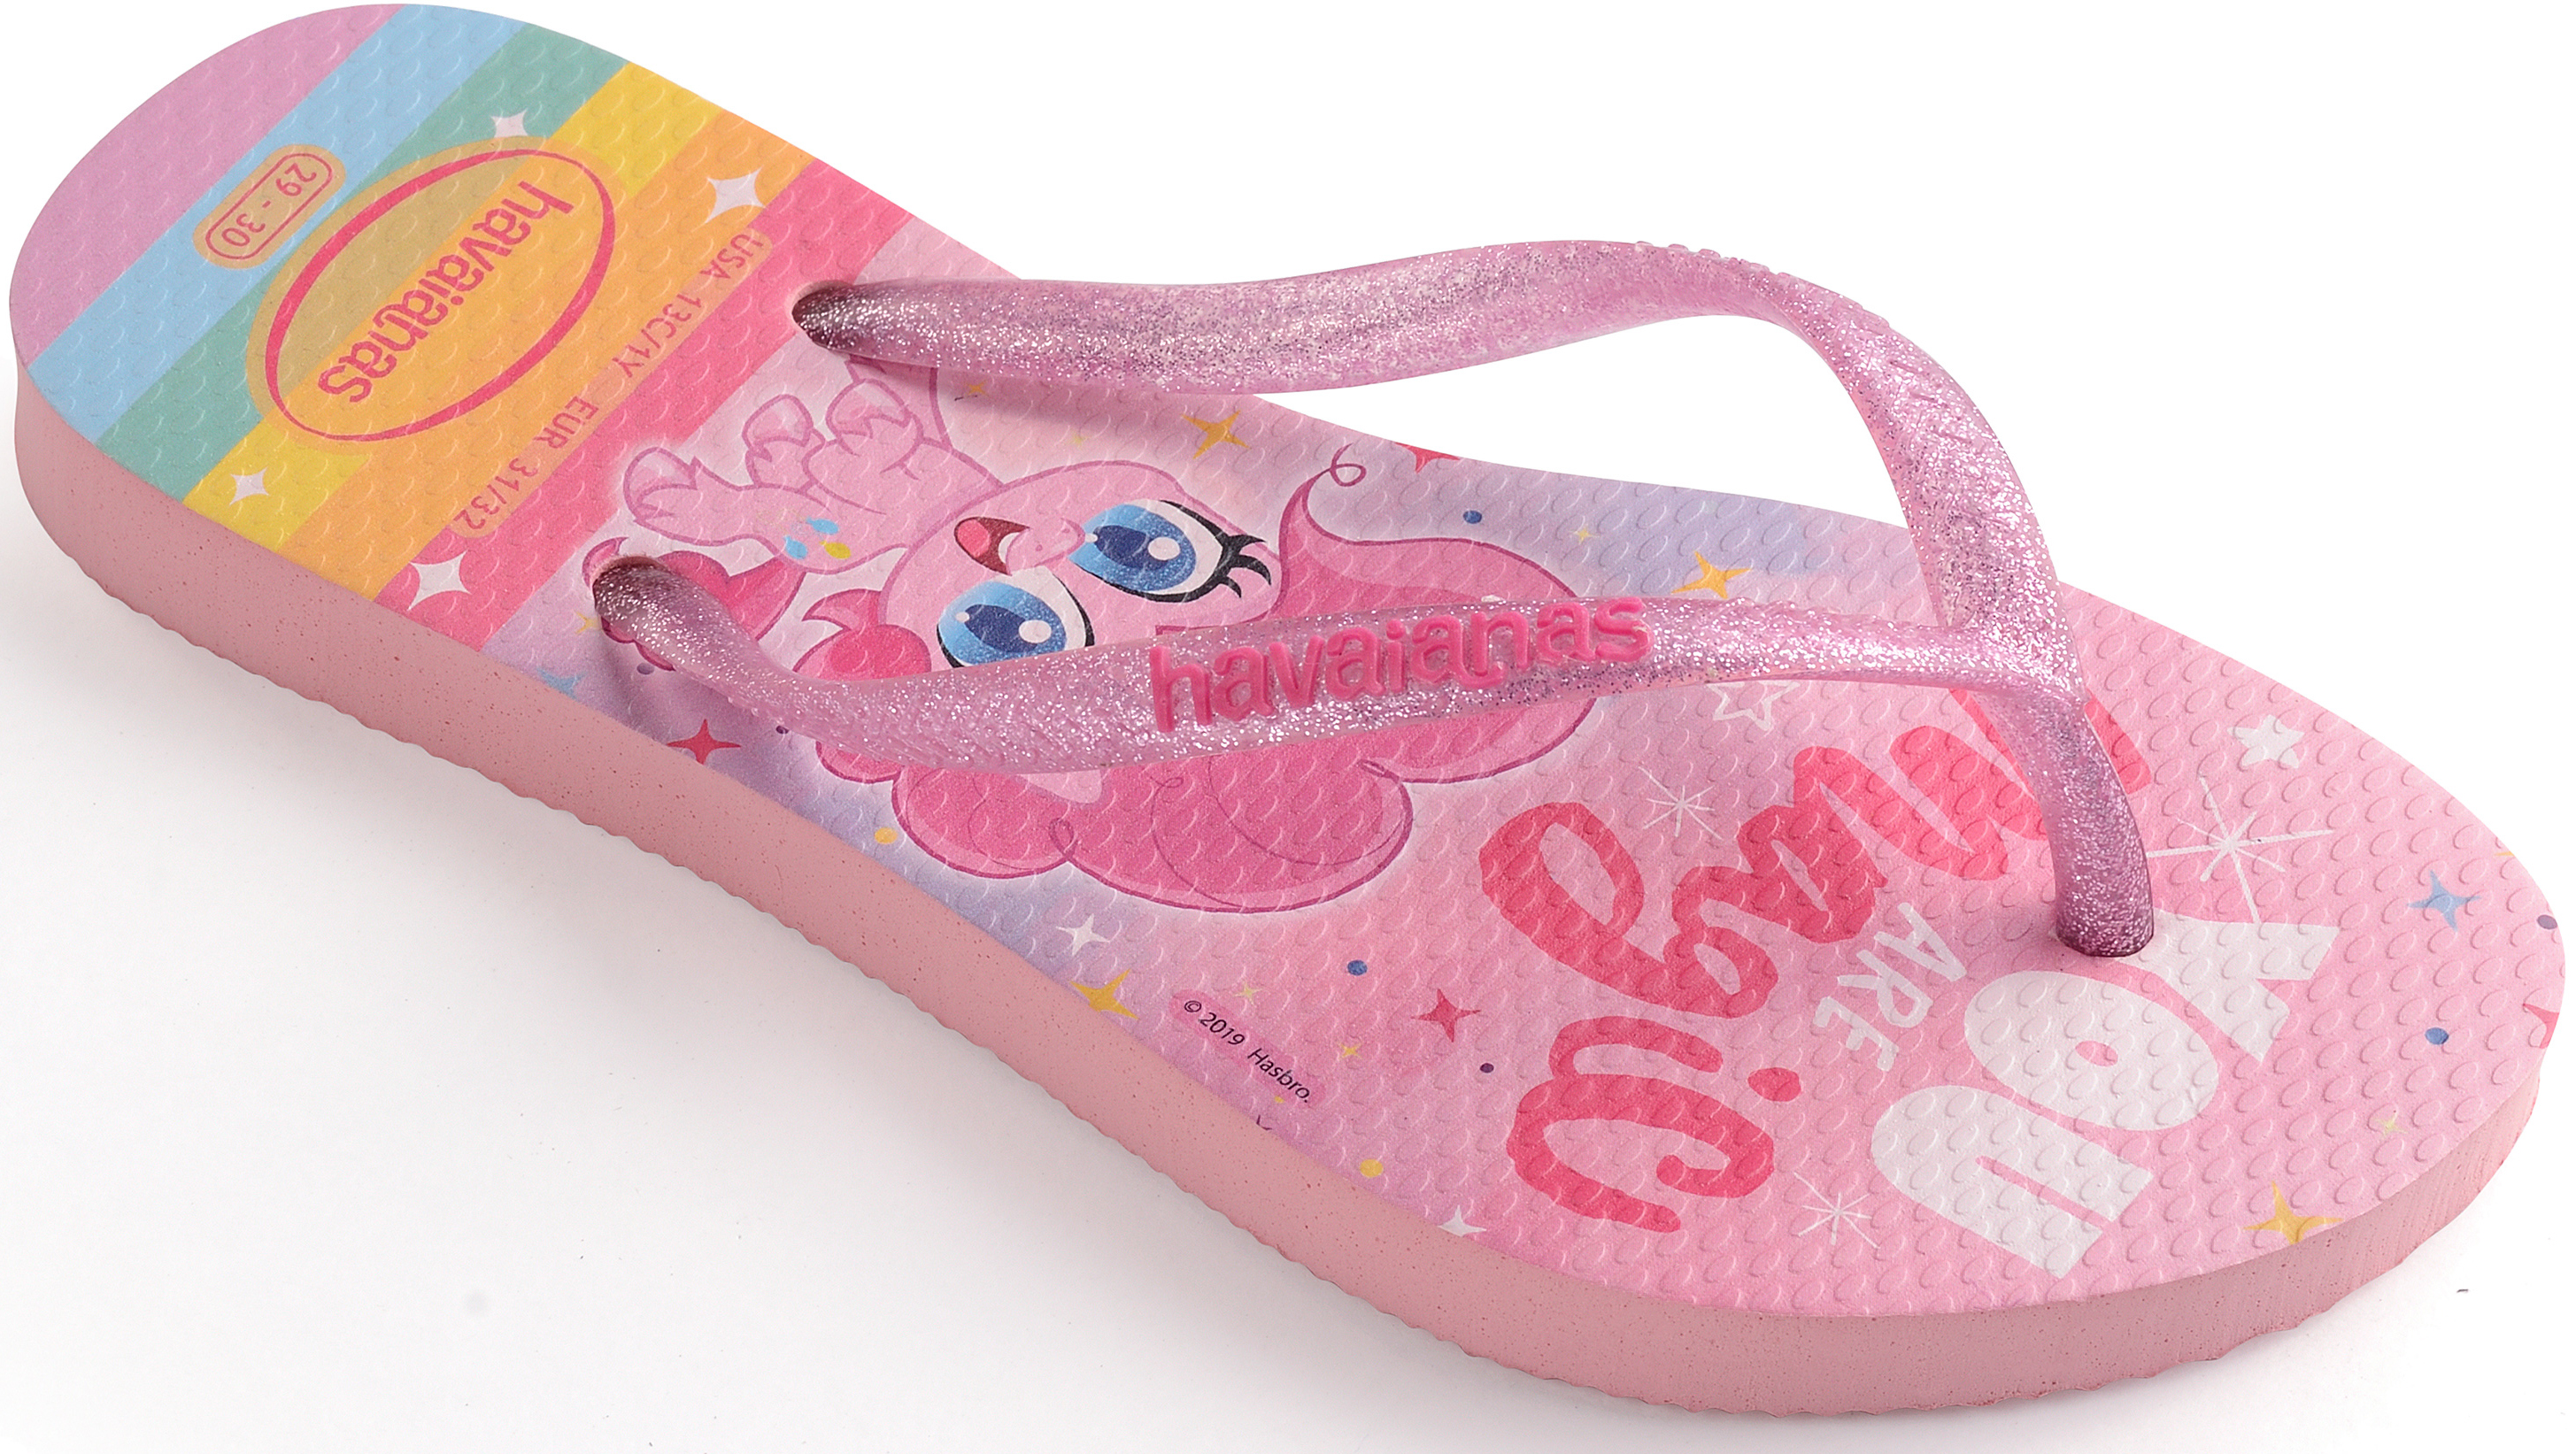 Kids Havaianas size Childs 13 Flip Flops  UK Stock, Shipped from Cornwall  - FlipFlopShop